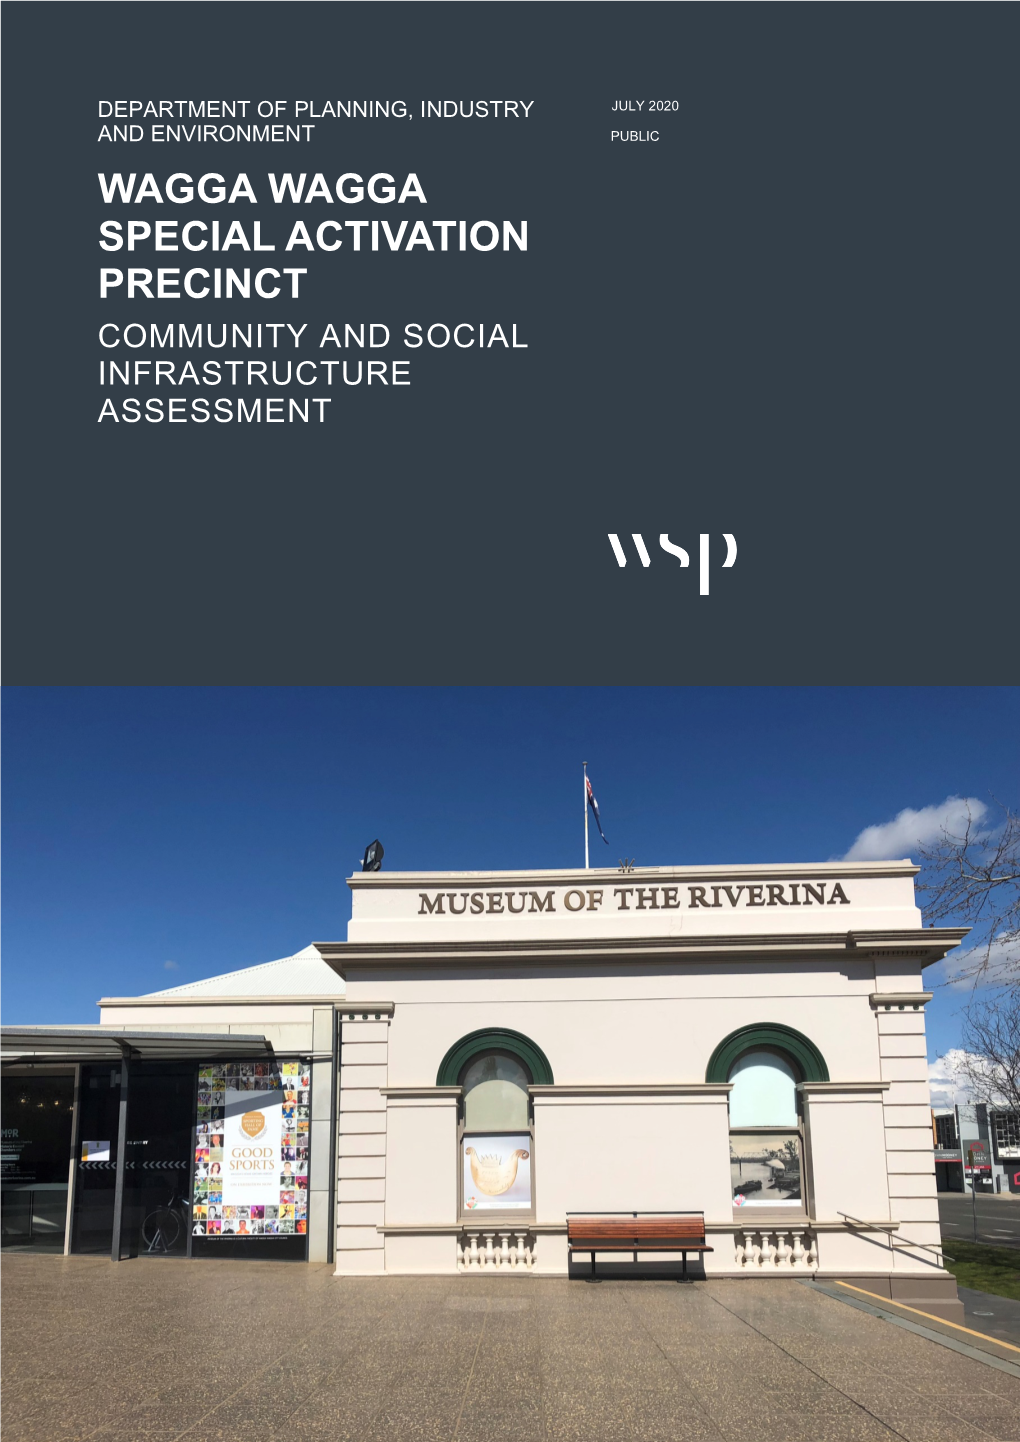 Community and Social Infrastructure Assessment